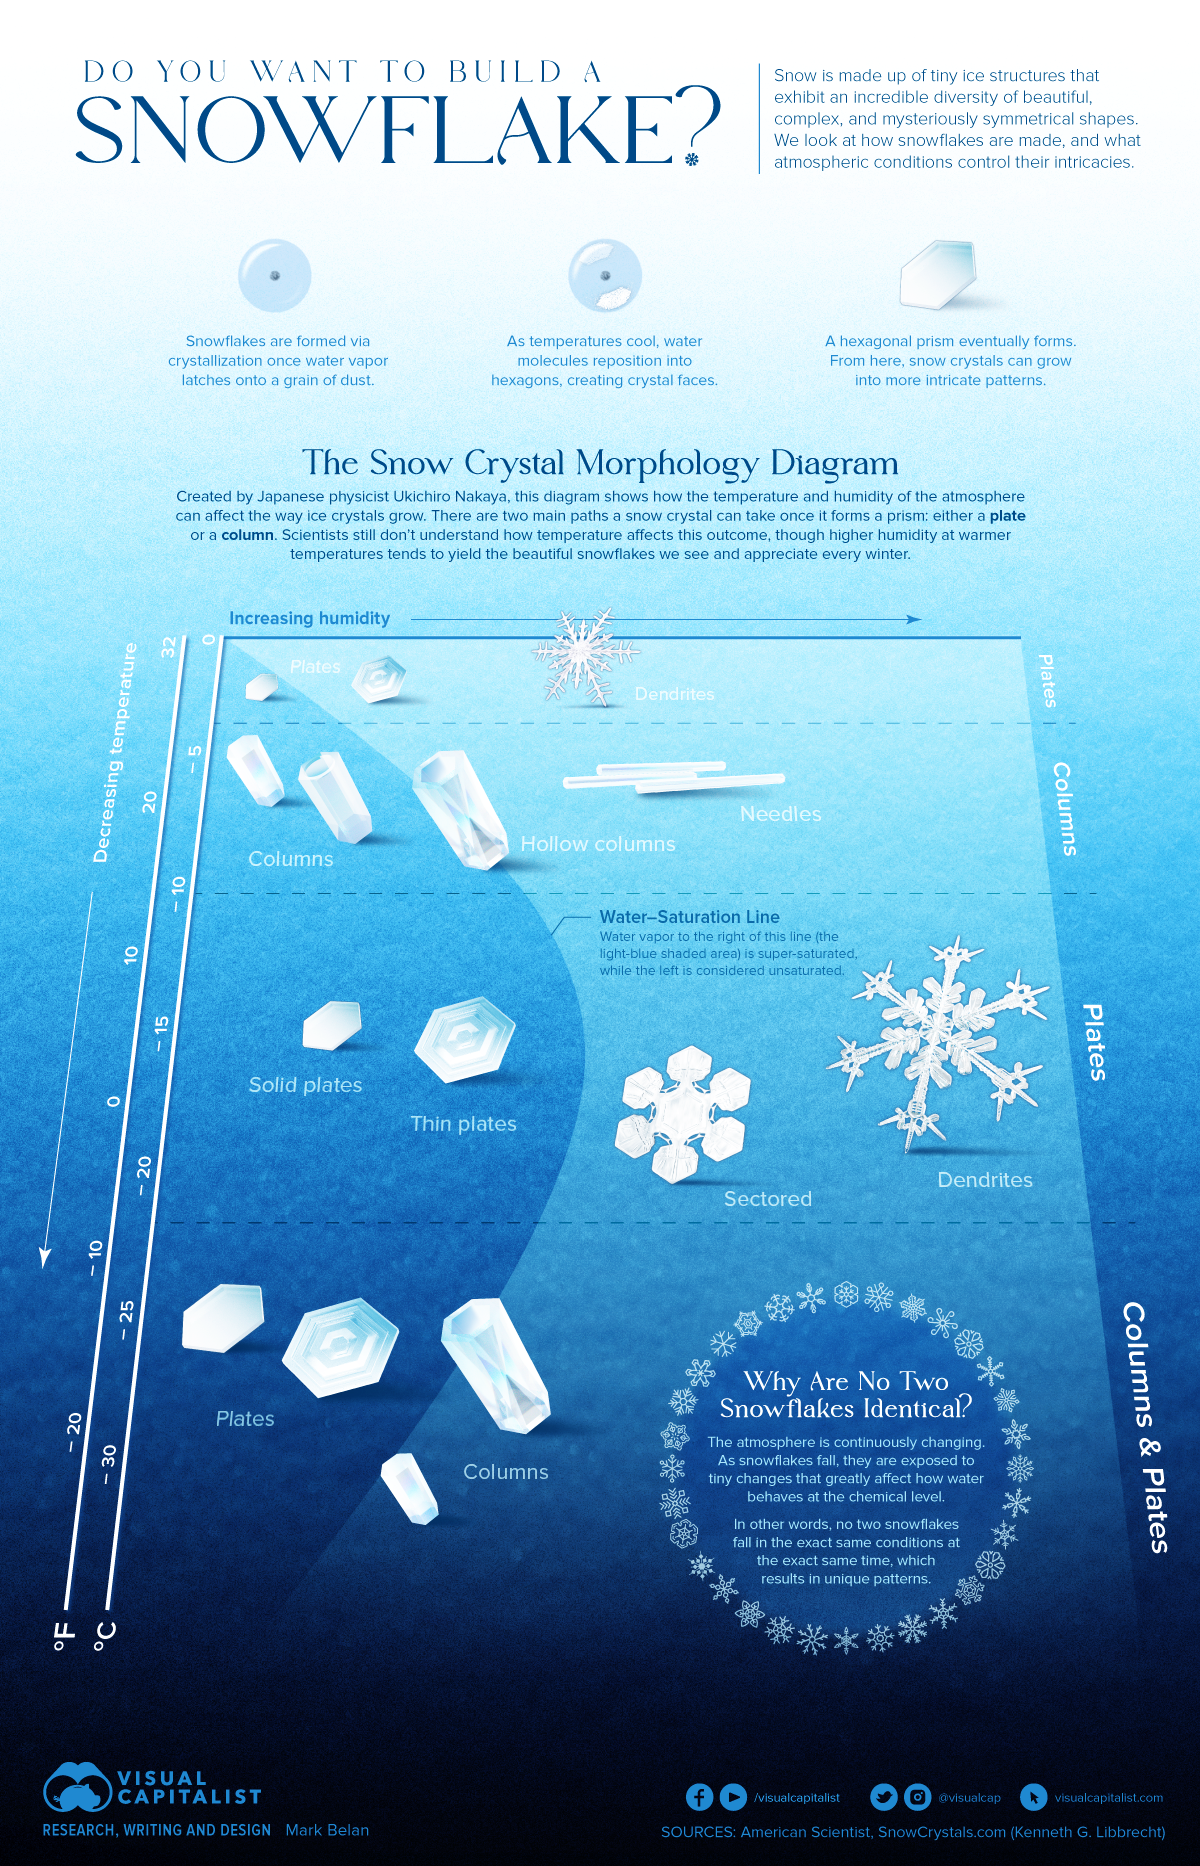 How are Snowflakes Formed in the Atmosphere?